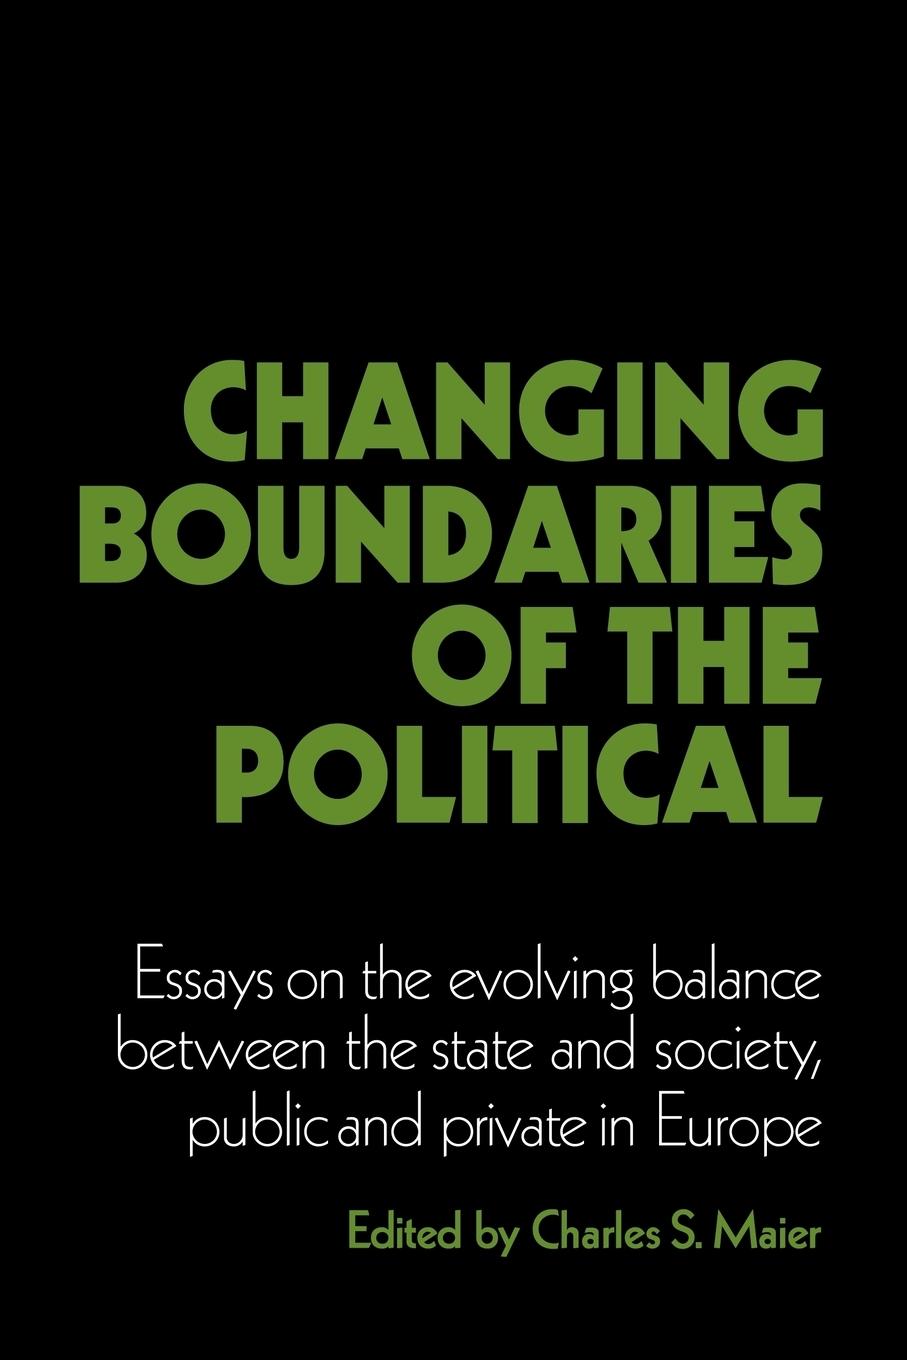 Changing Boundaries of the Political - Maier, Charles S.